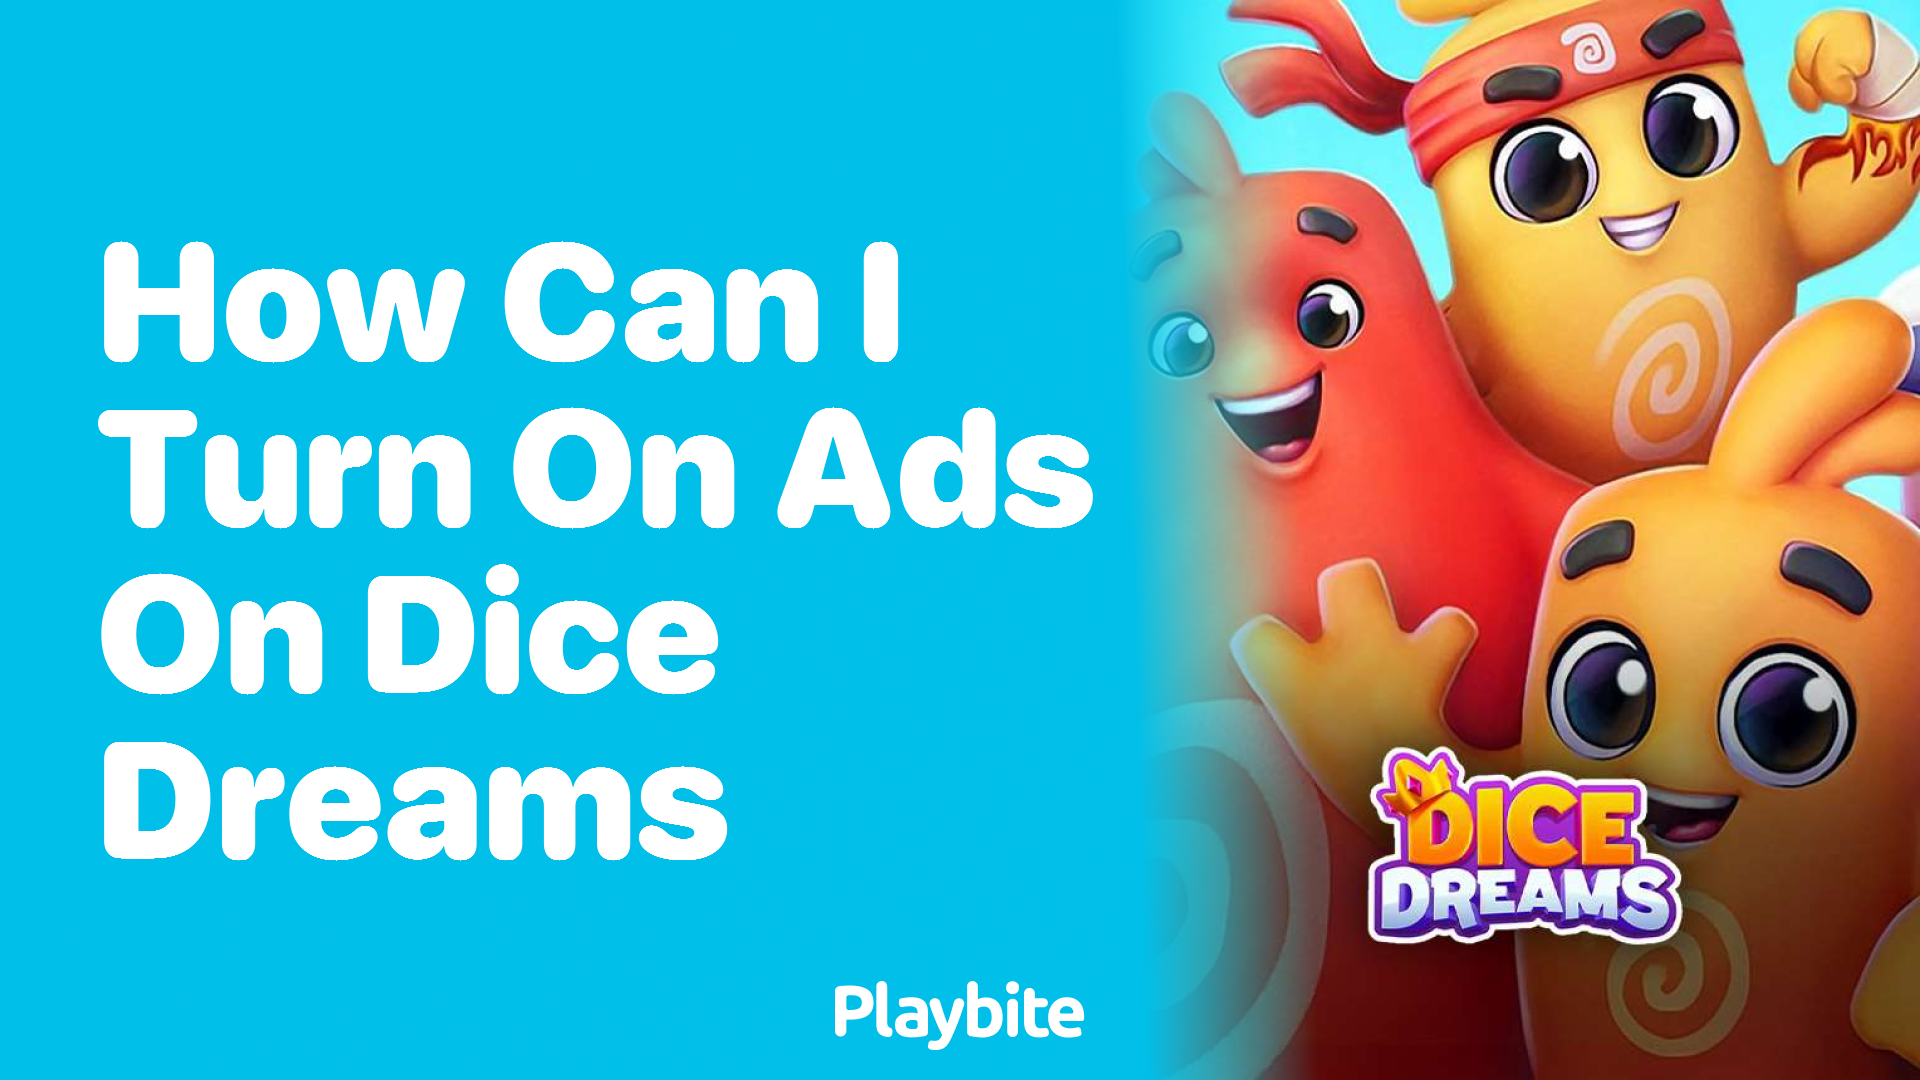 How Can I Turn on Ads on Dice Dreams?